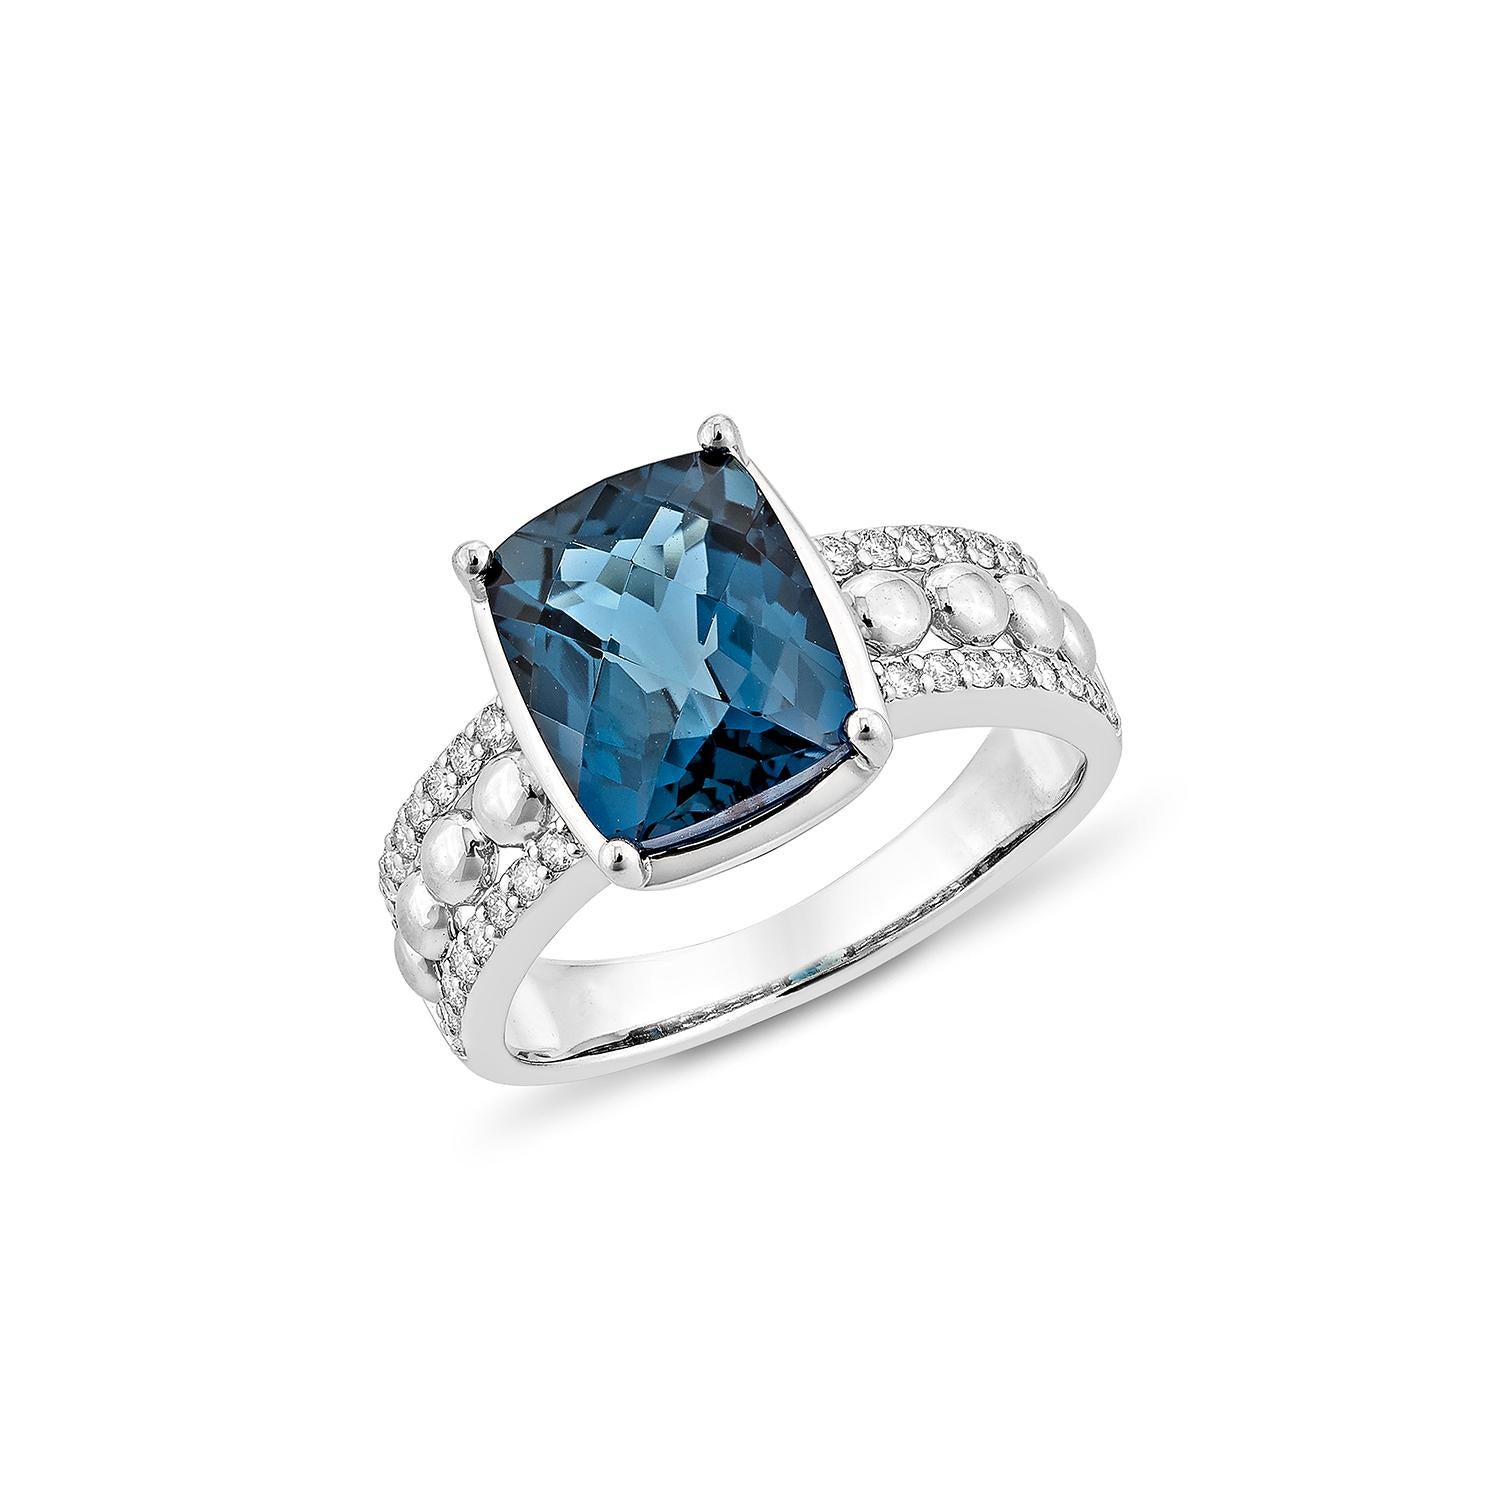 Contemporary 3.94 Carat London Blue Topaz Fancy Ring in 18Karat White Gold with Diamond. For Sale